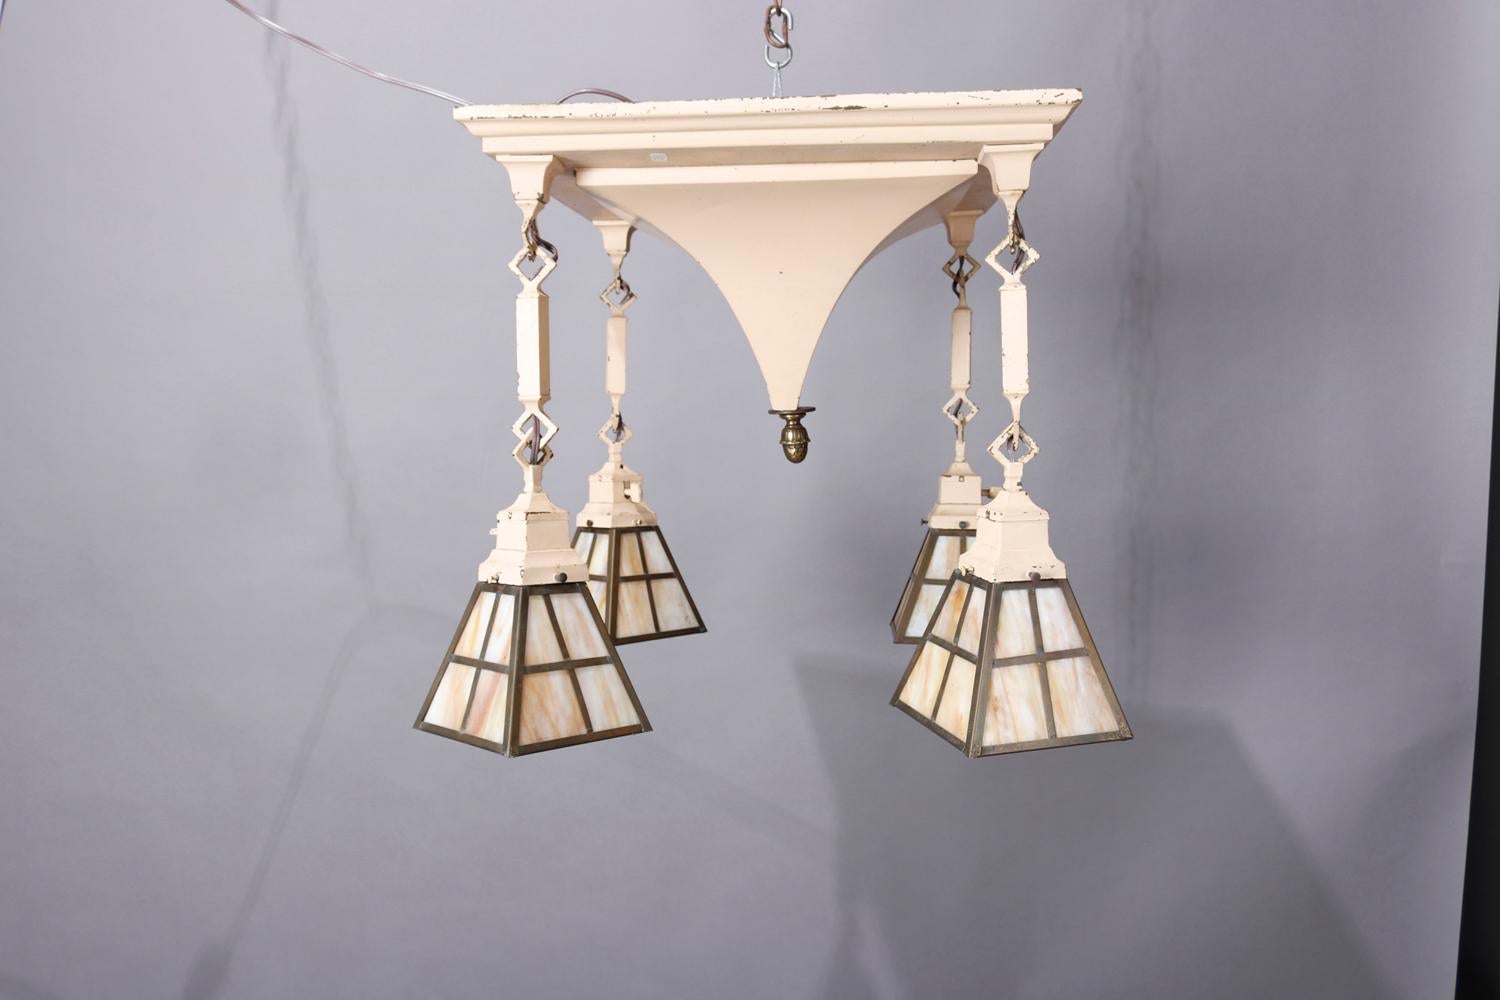 An Arts & Crafts hanging light offers painted metal construction with pyramidal form ceiling cover with four drop slag glass lights, 20th century. 

***DELIVERY NOTICE – Due to COVID-19 we are employing NO-CONTACT PRACTICES in the transfer of